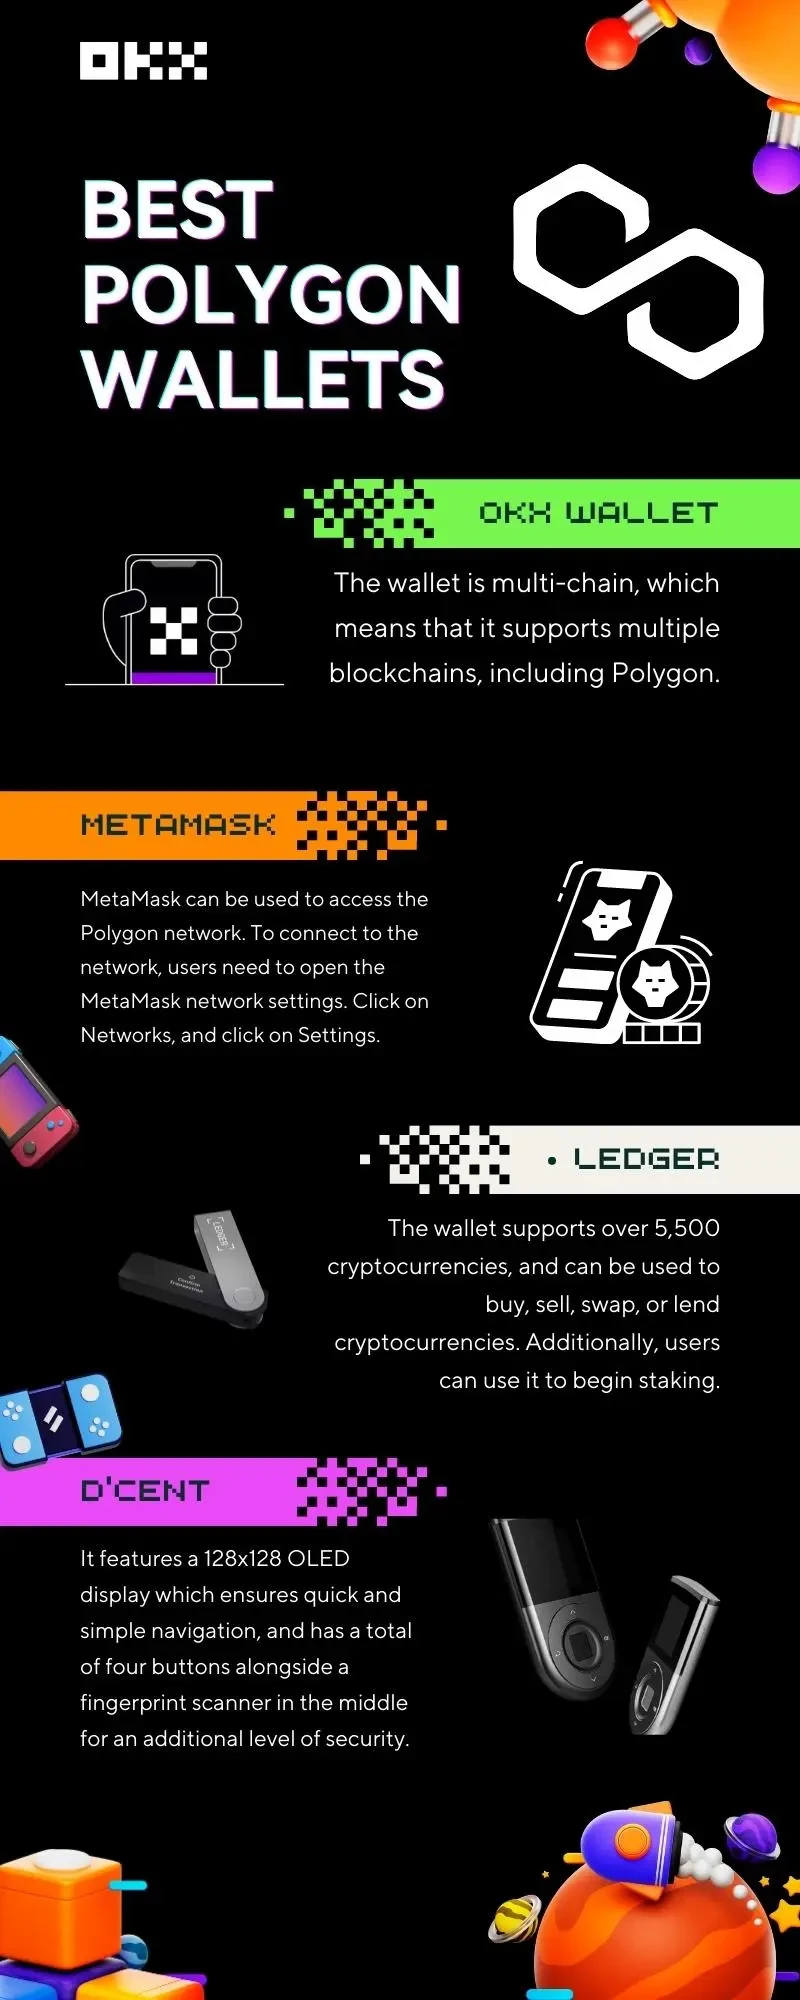 best polygon wallet infographic 2023